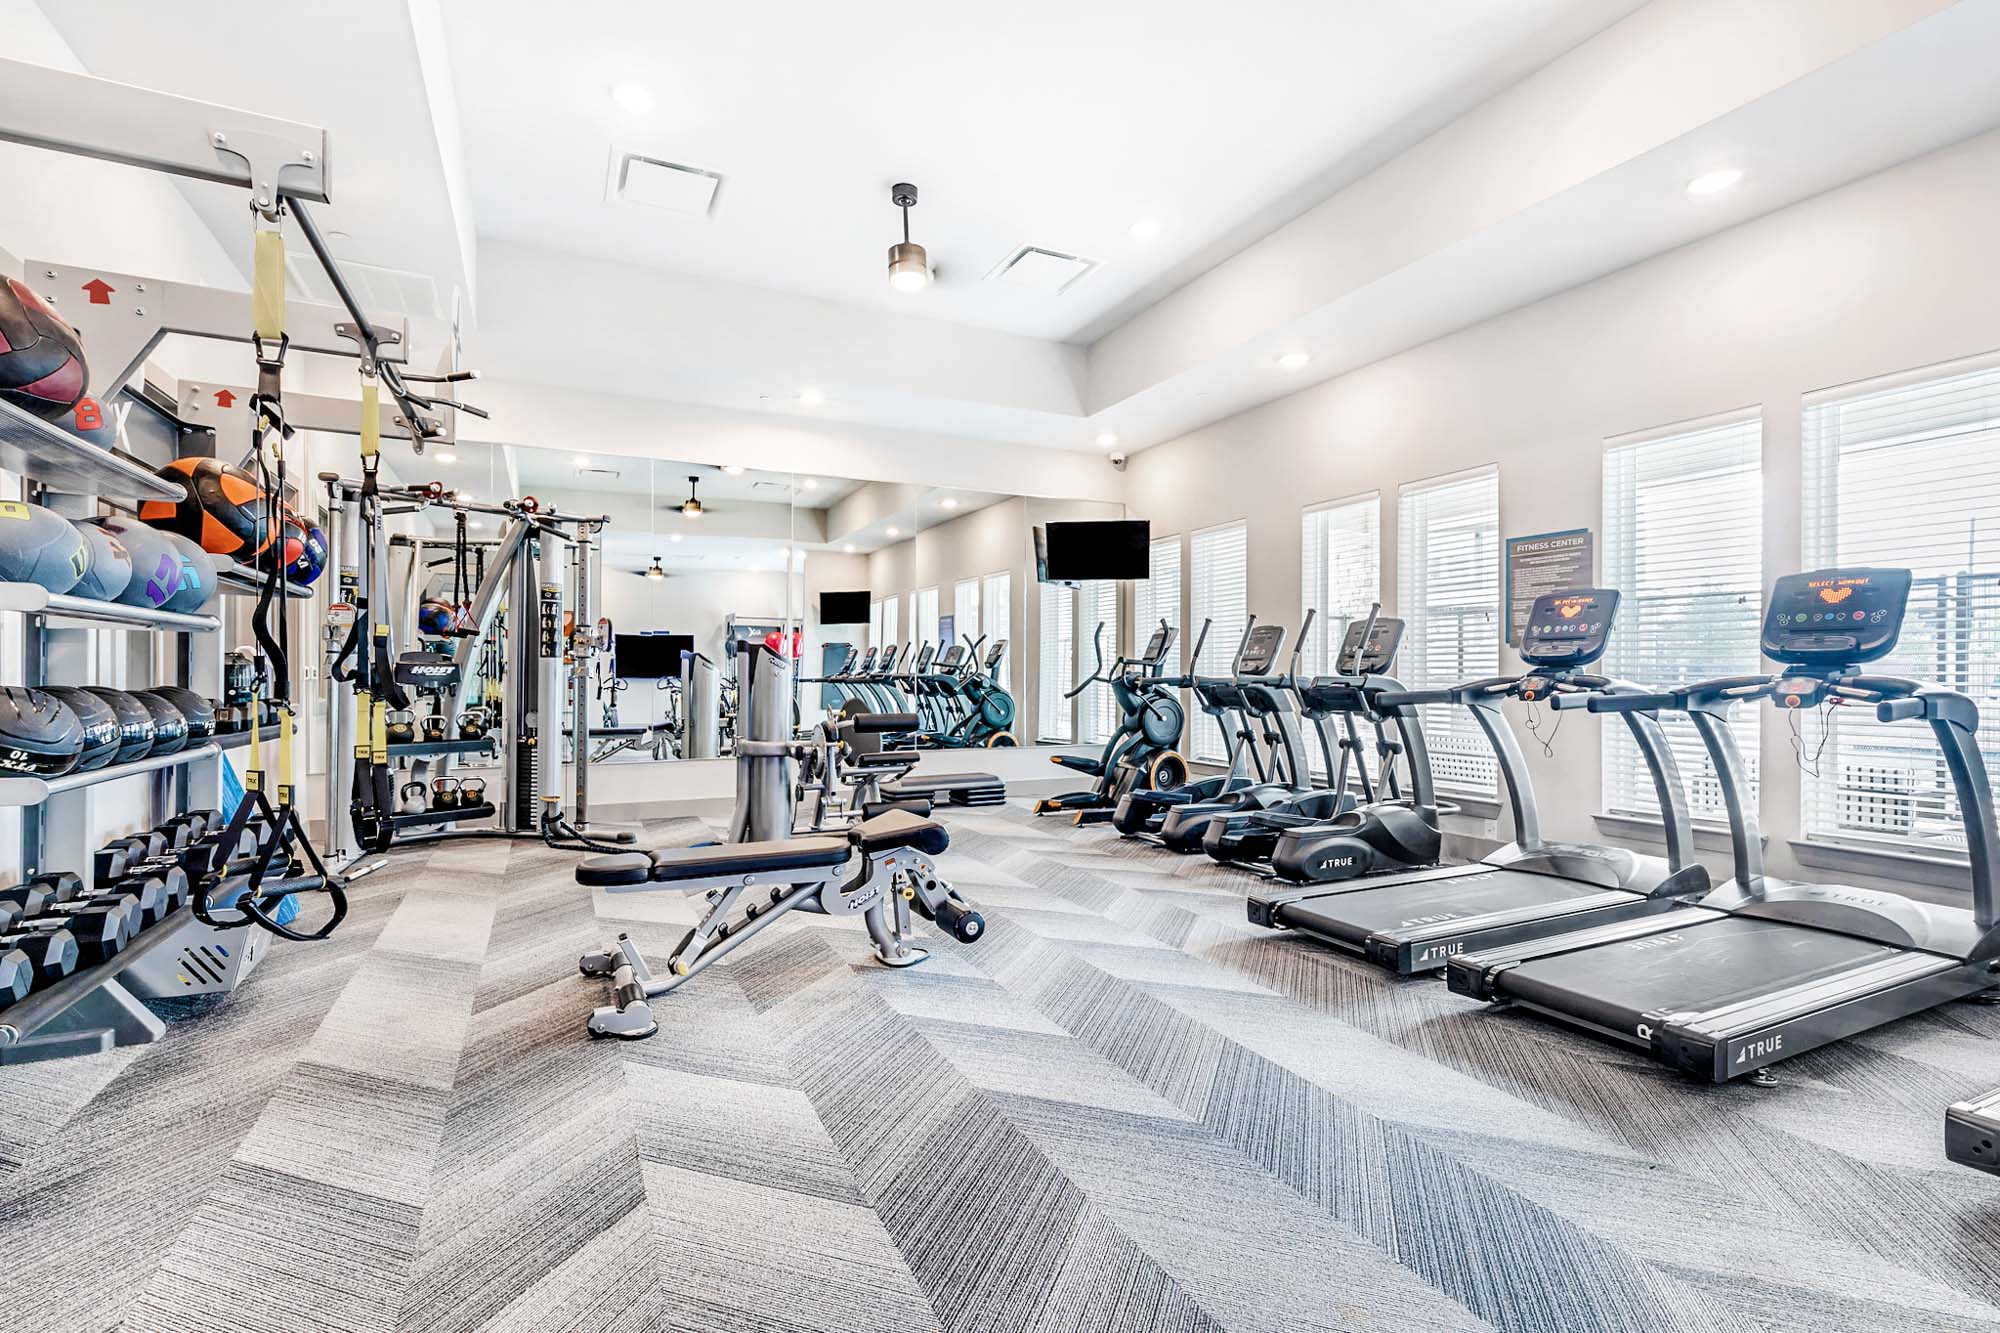 The fitness center at Embree Hill apartments in Dallas, TX.